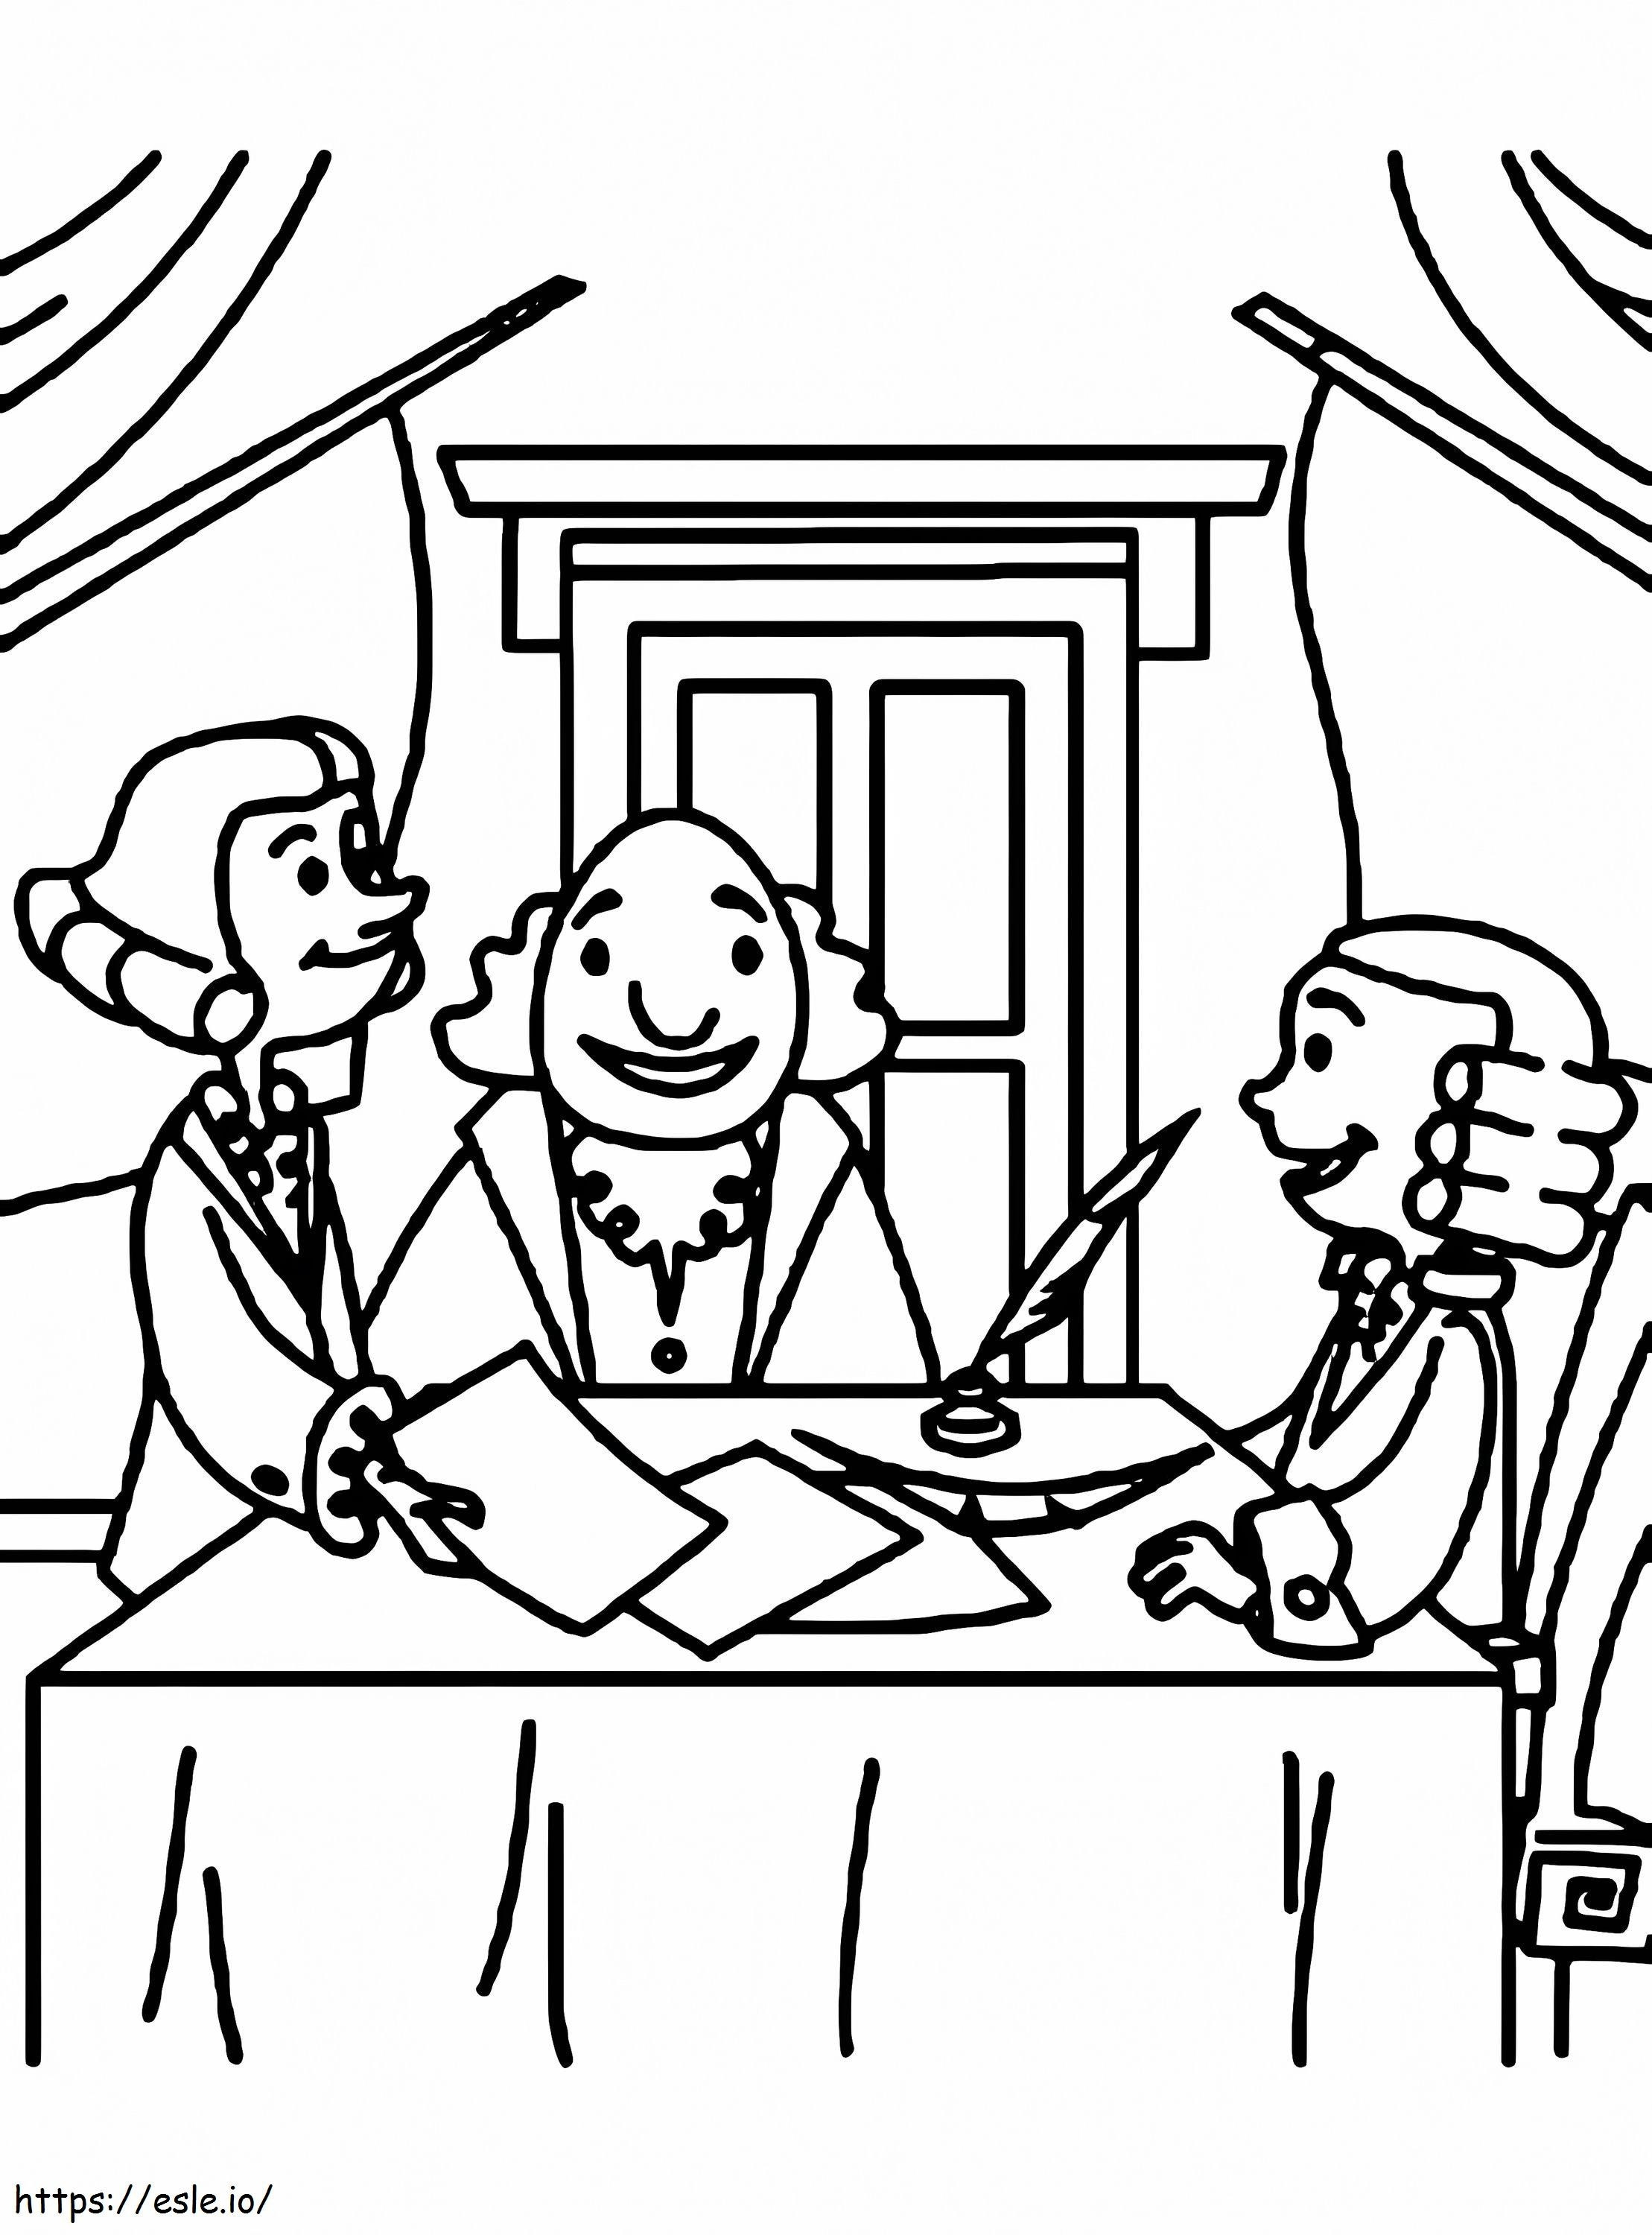 Constitution Day 7 coloring page